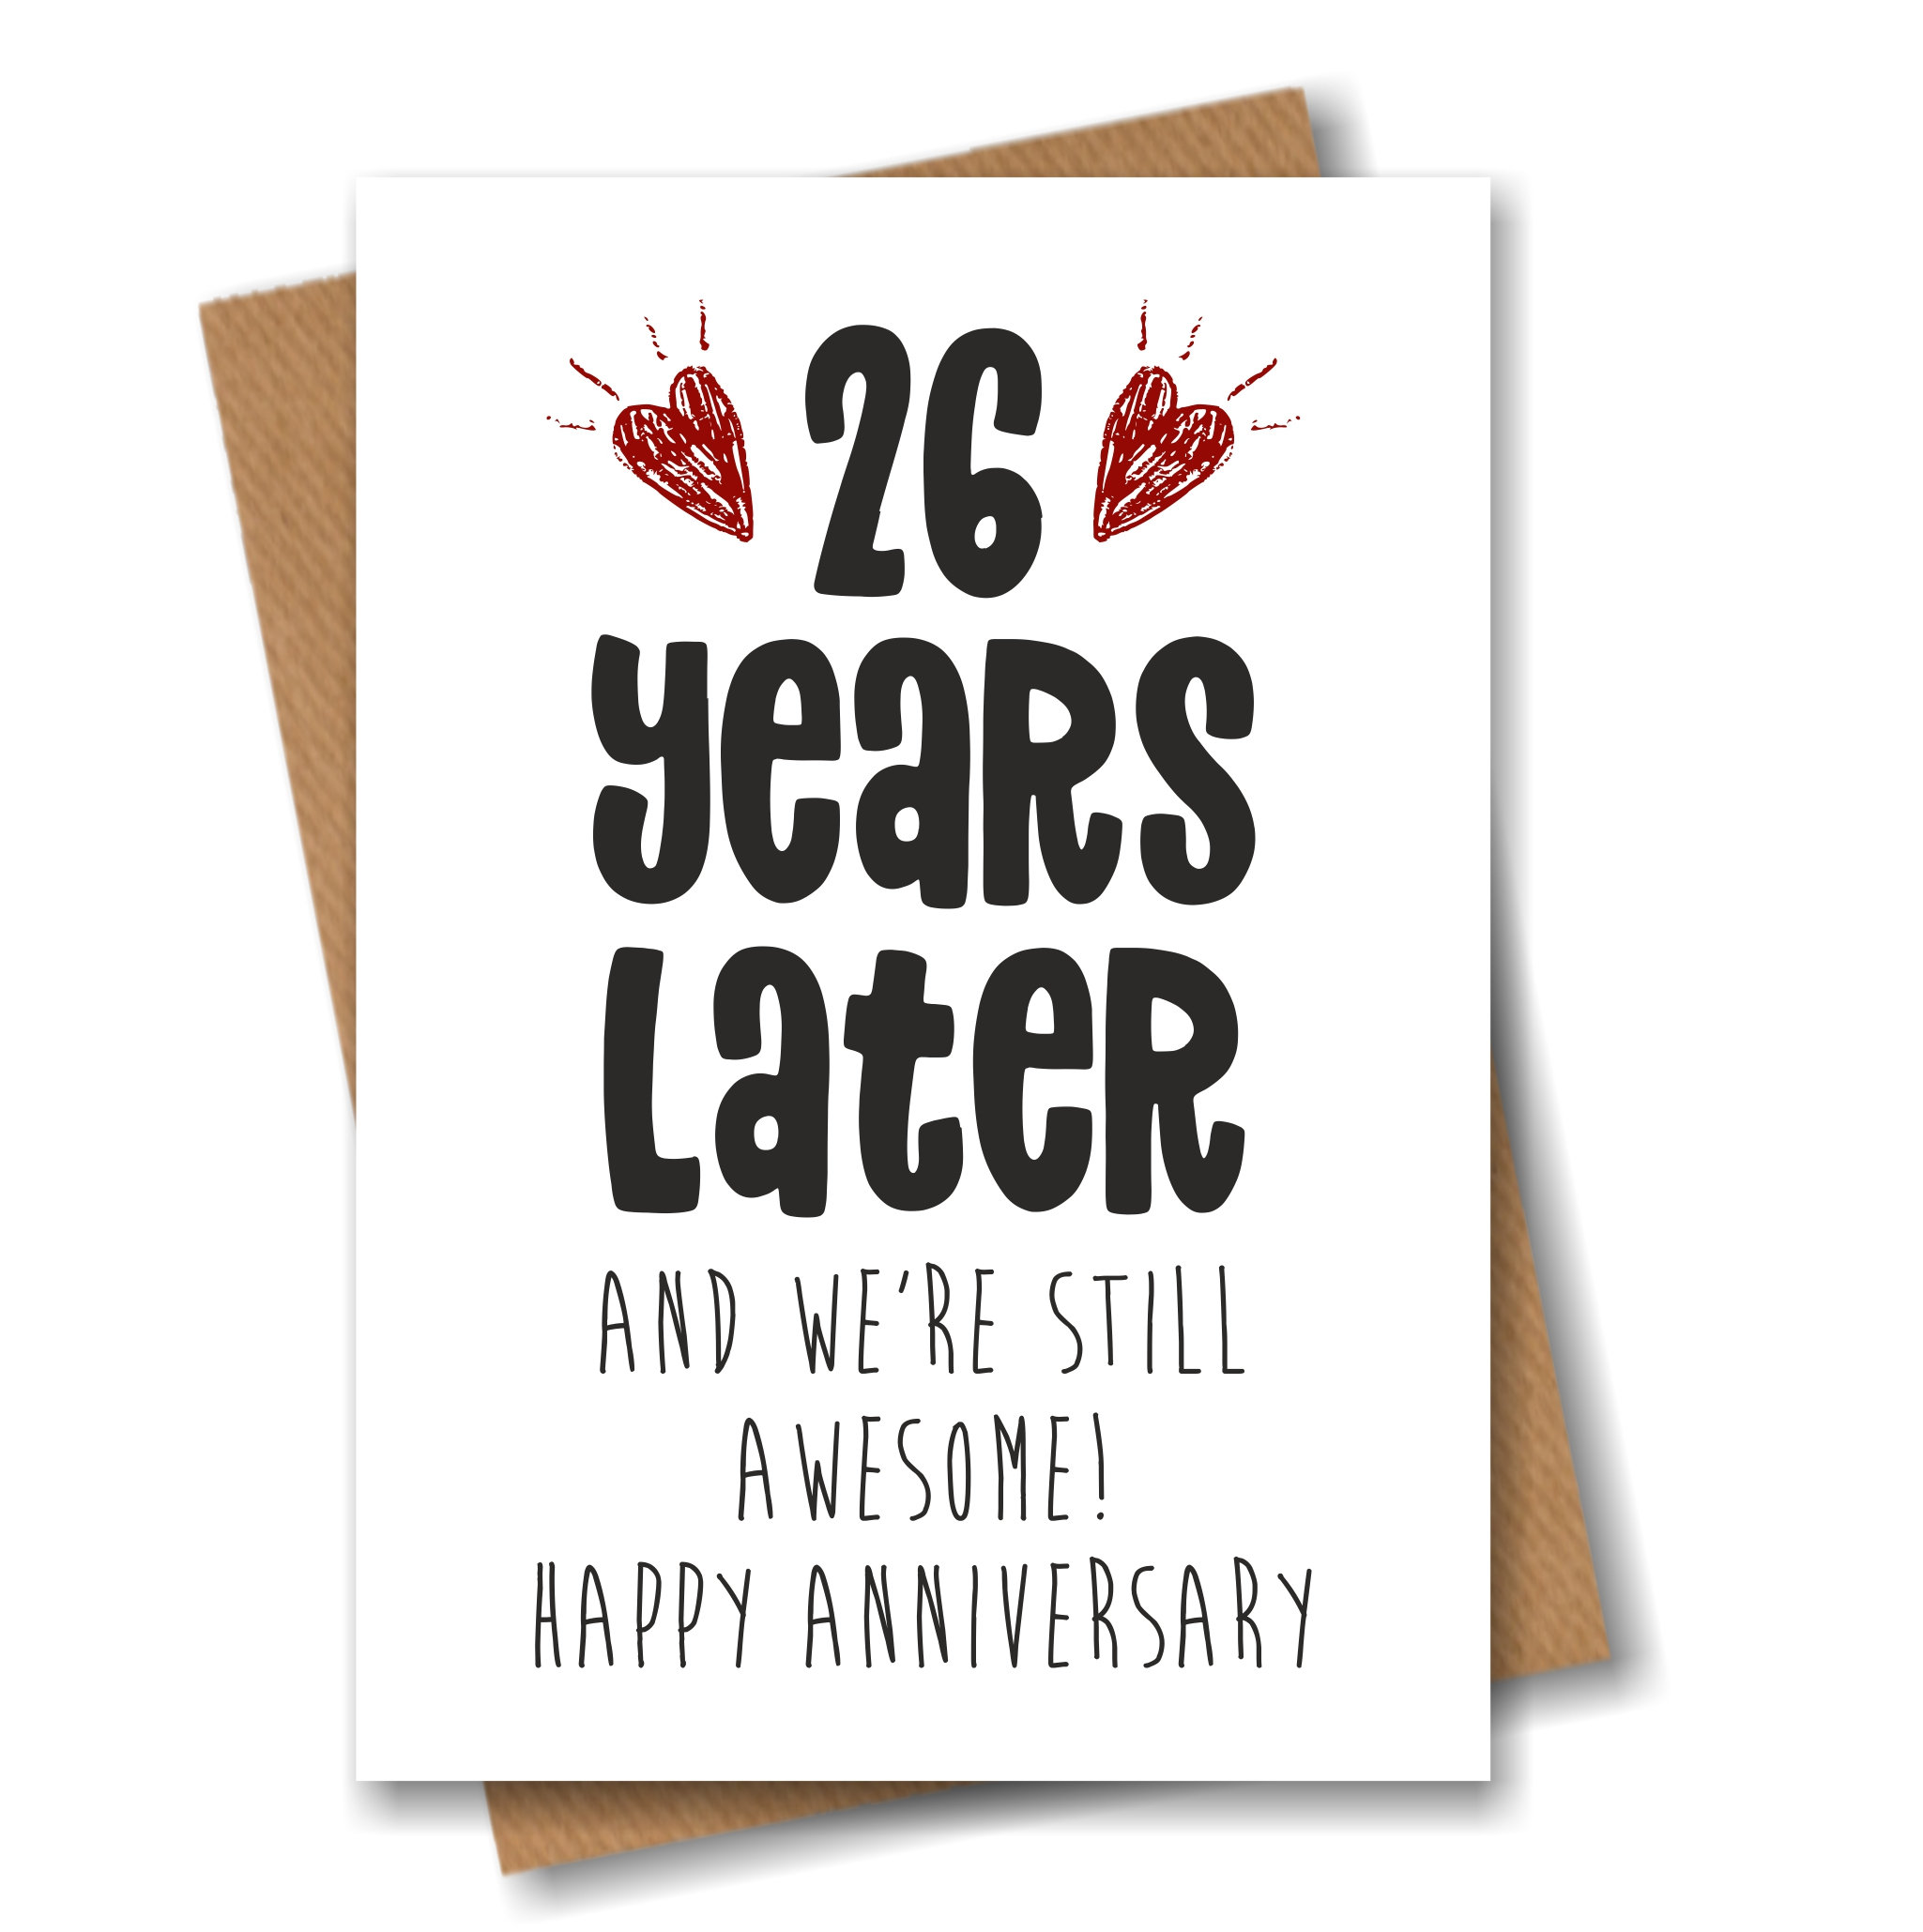 26th-anniversary-card-26-years-later-and-still-awesome-etsy